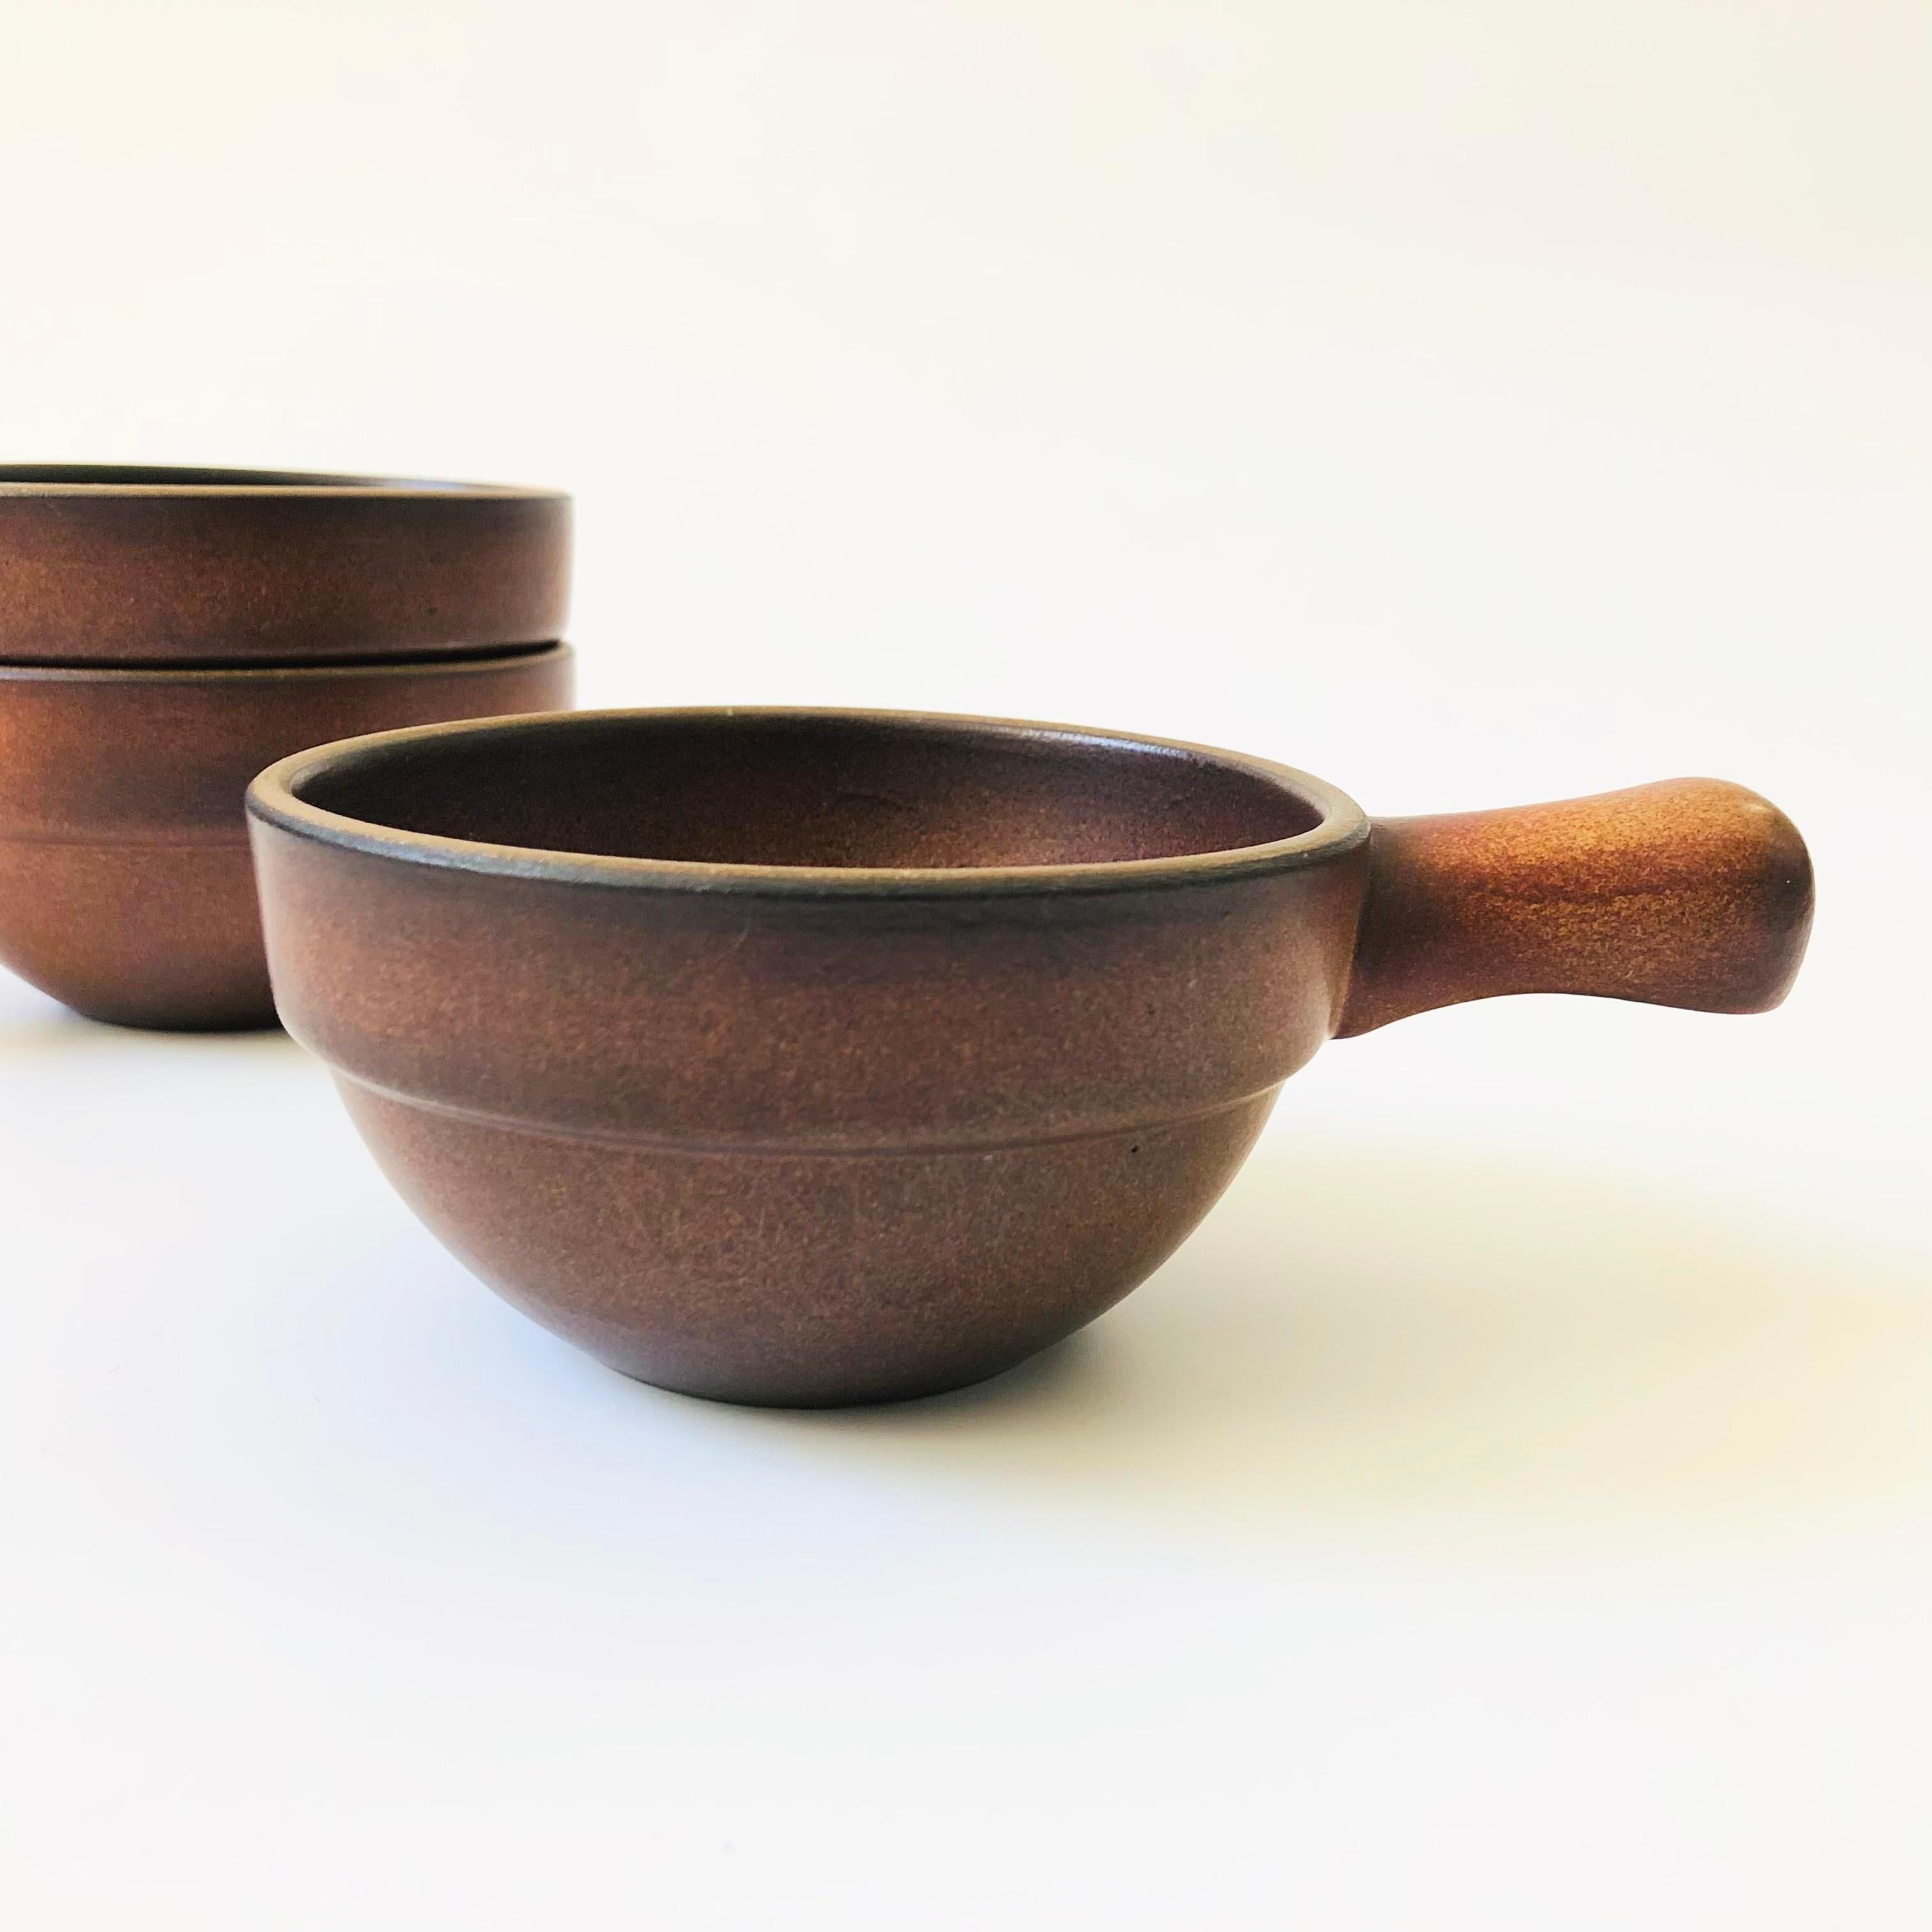 A set of 3 vintage bowls by Heath Ceramics of Sausalito. Each piece has a handle formed on one side and is finished in a lovely natural reddish brown glaze. Lovely variation to the glaze.  Marked on the base by Heath.

